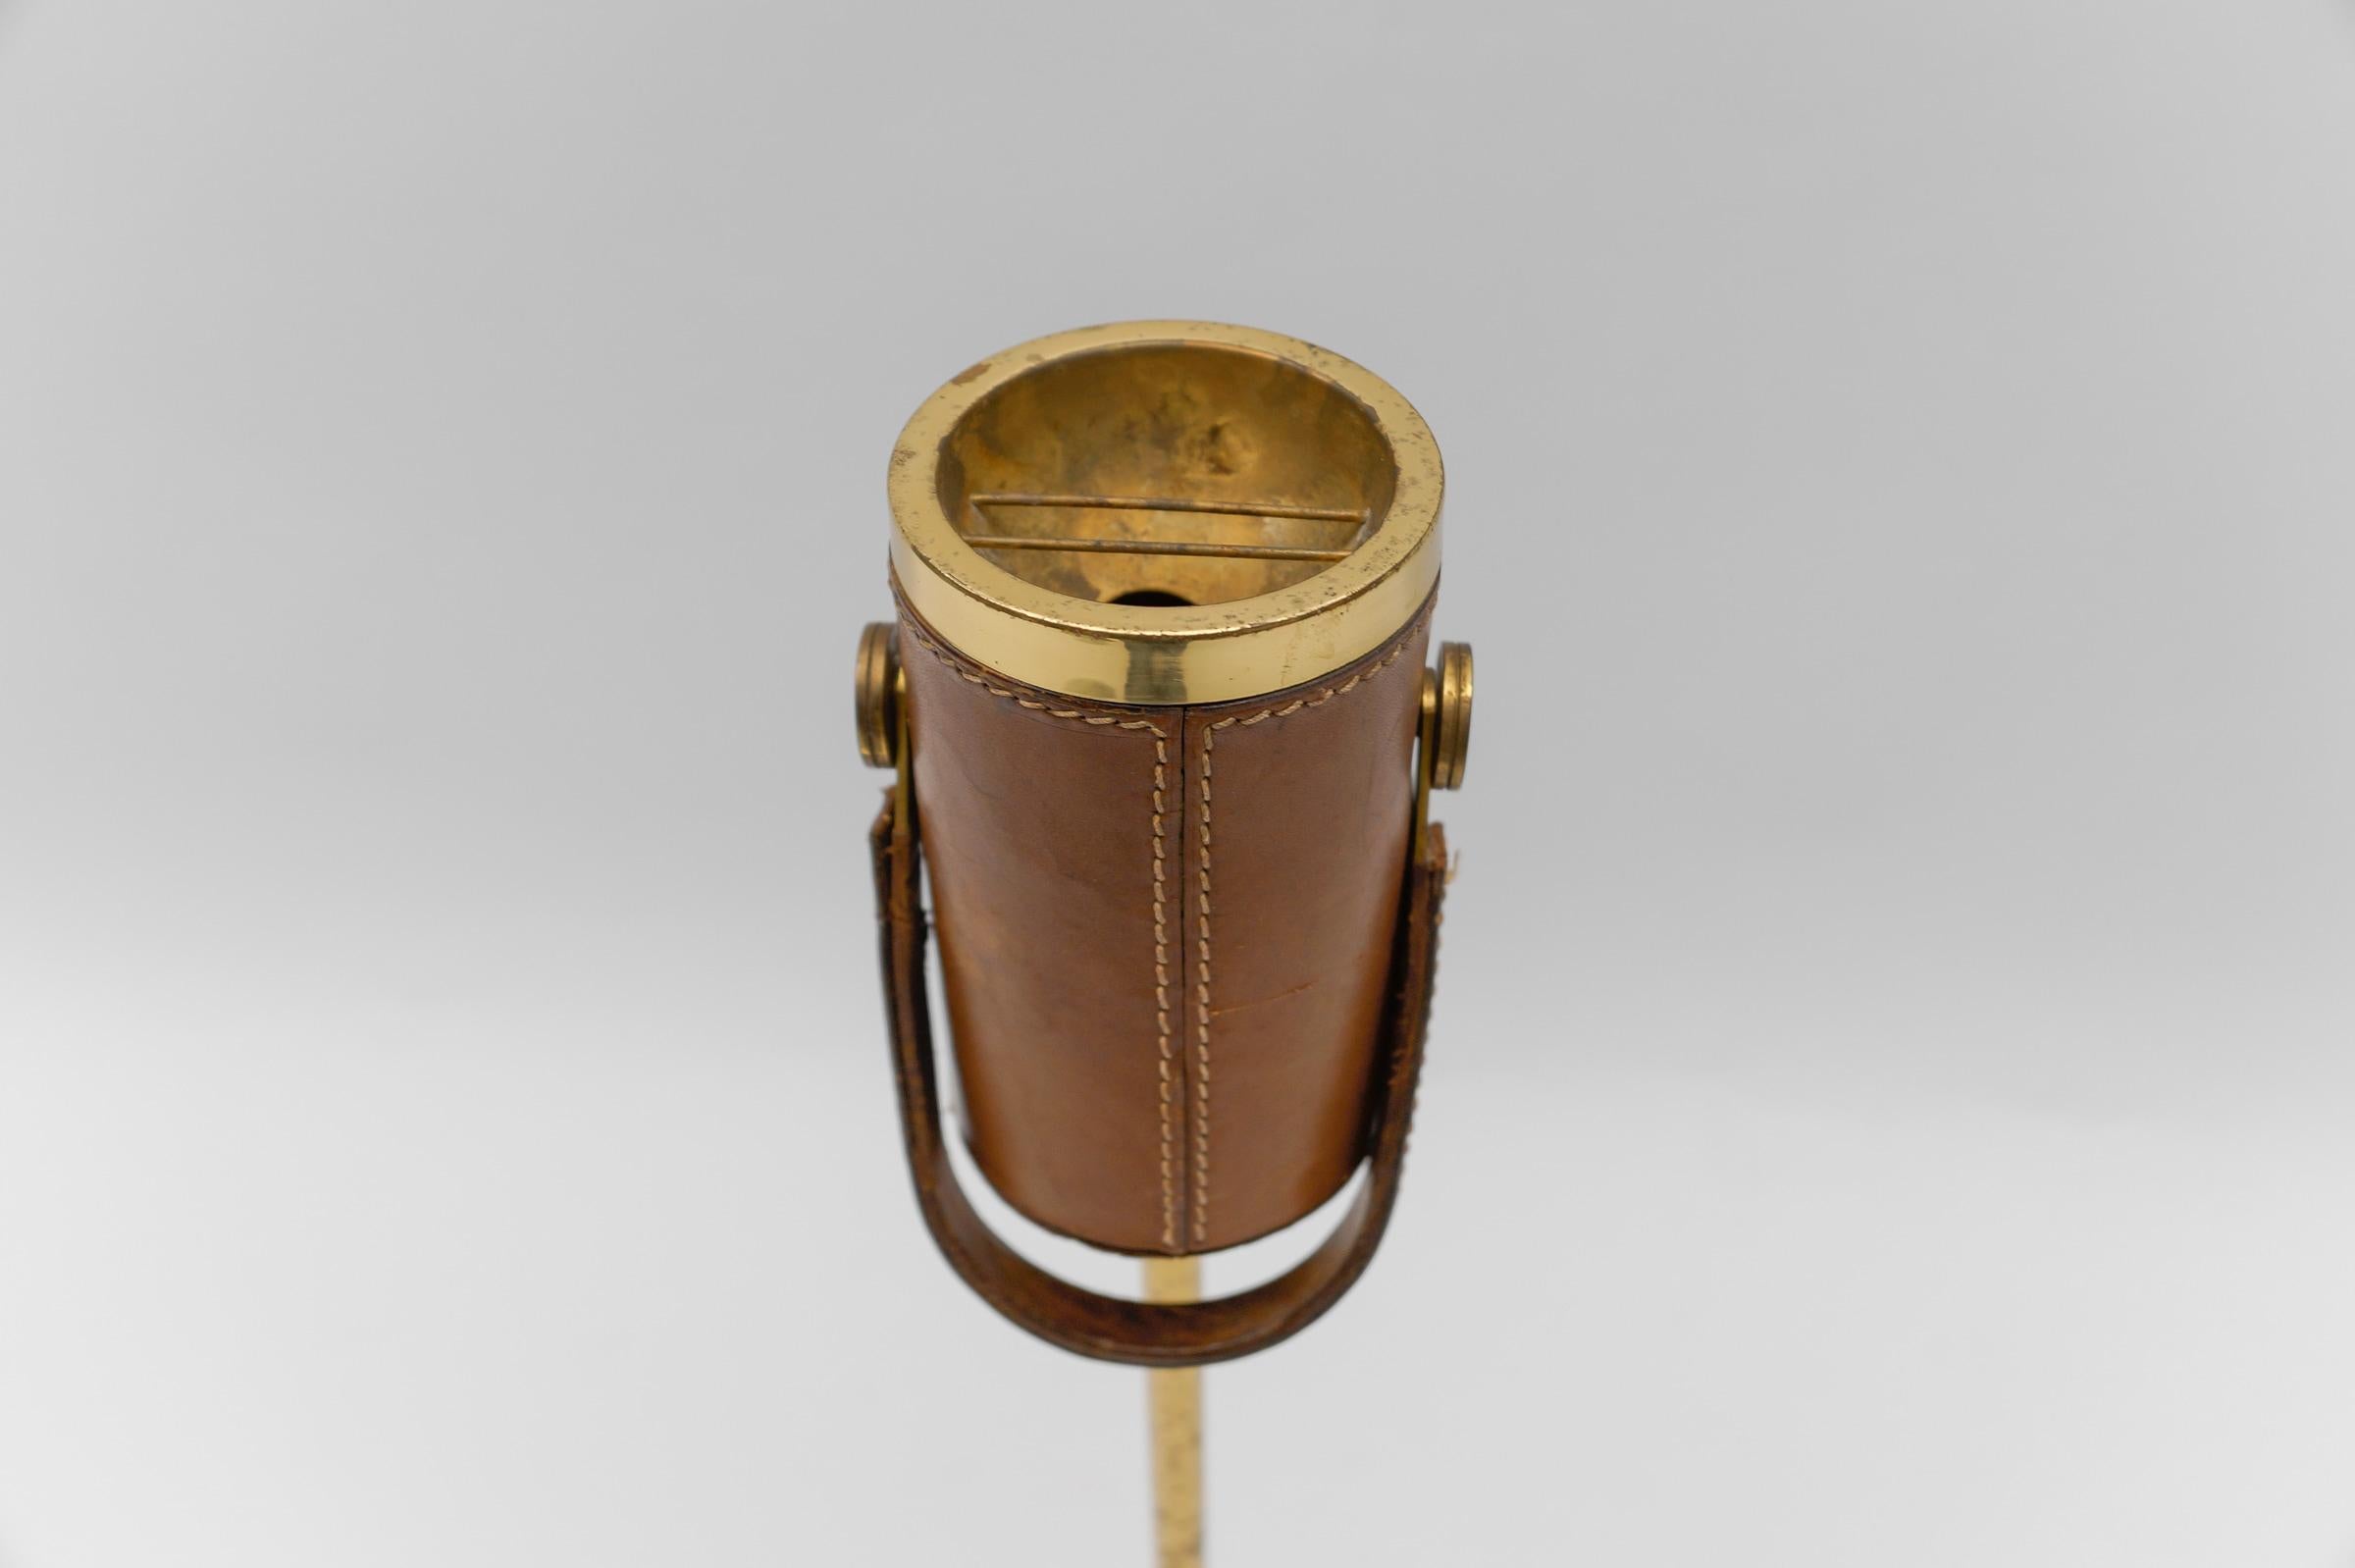 Mid-20th Century Portable Ashtray Stand in the Manner of Jacques Adnet, Brass and Leather, 1950s For Sale